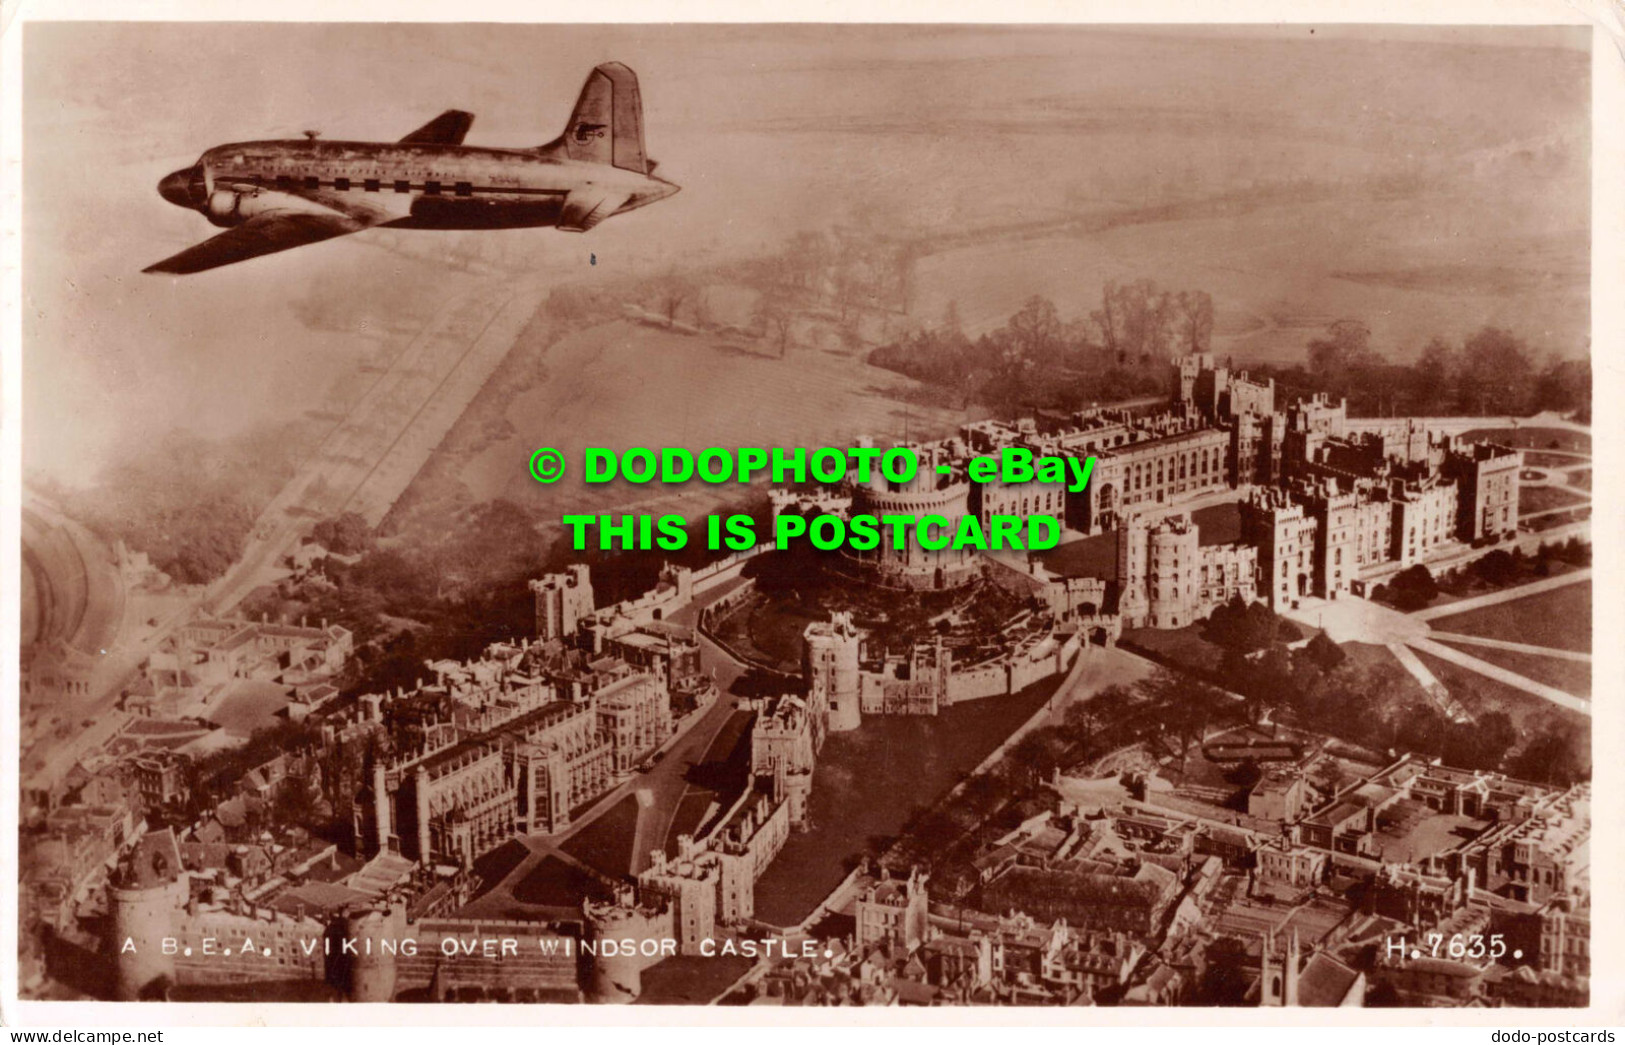 R547394 A B. E. A. Viking Over Windsor Castle. H. 7635. Valentines. RP. 1964 - World